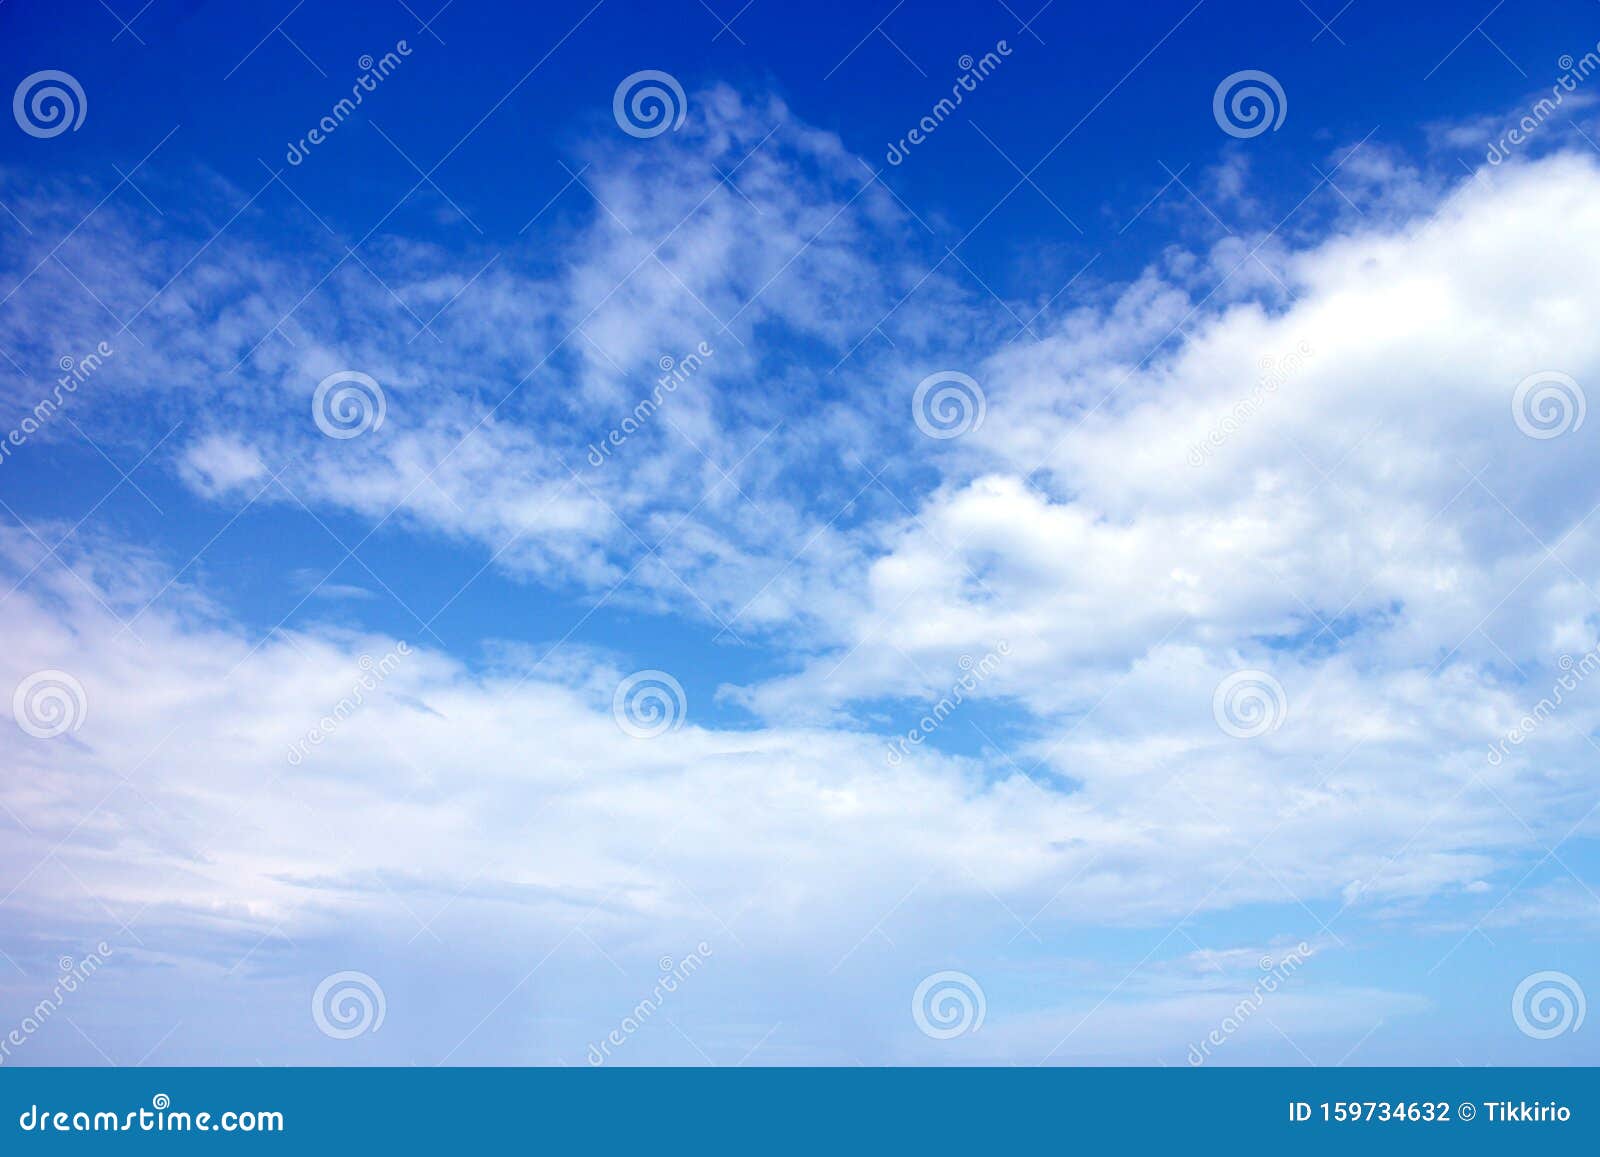 clear blue sky and white clouds background, cloudy daytime cyan cosmos banner, cloudless climate wallpaper